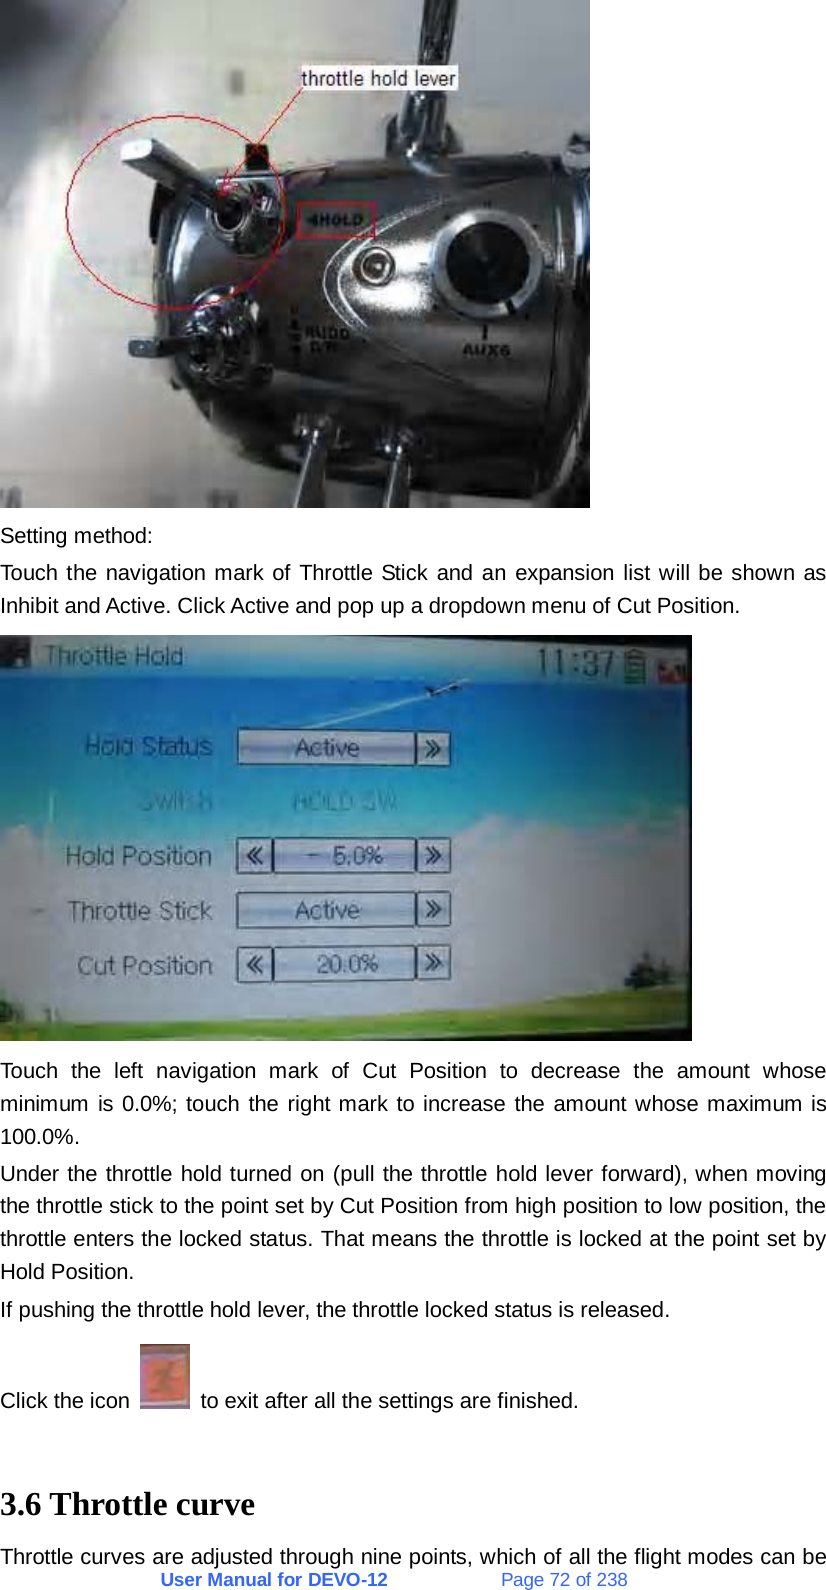 User Manual for DEVO-12             Page 72 of 238  Setting method: Touch the navigation mark of Throttle Stick and an expansion list will be shown as Inhibit and Active. Click Active and pop up a dropdown menu of Cut Position.  Touch the left navigation mark of Cut Position to decrease the amount whose minimum is 0.0%; touch the right mark to increase the amount whose maximum is 100.0%. Under the throttle hold turned on (pull the throttle hold lever forward), when moving the throttle stick to the point set by Cut Position from high position to low position, the throttle enters the locked status. That means the throttle is locked at the point set by Hold Position. If pushing the throttle hold lever, the throttle locked status is released. Click the icon    to exit after all the settings are finished.  3.6 Throttle curve Throttle curves are adjusted through nine points, which of all the flight modes can be 